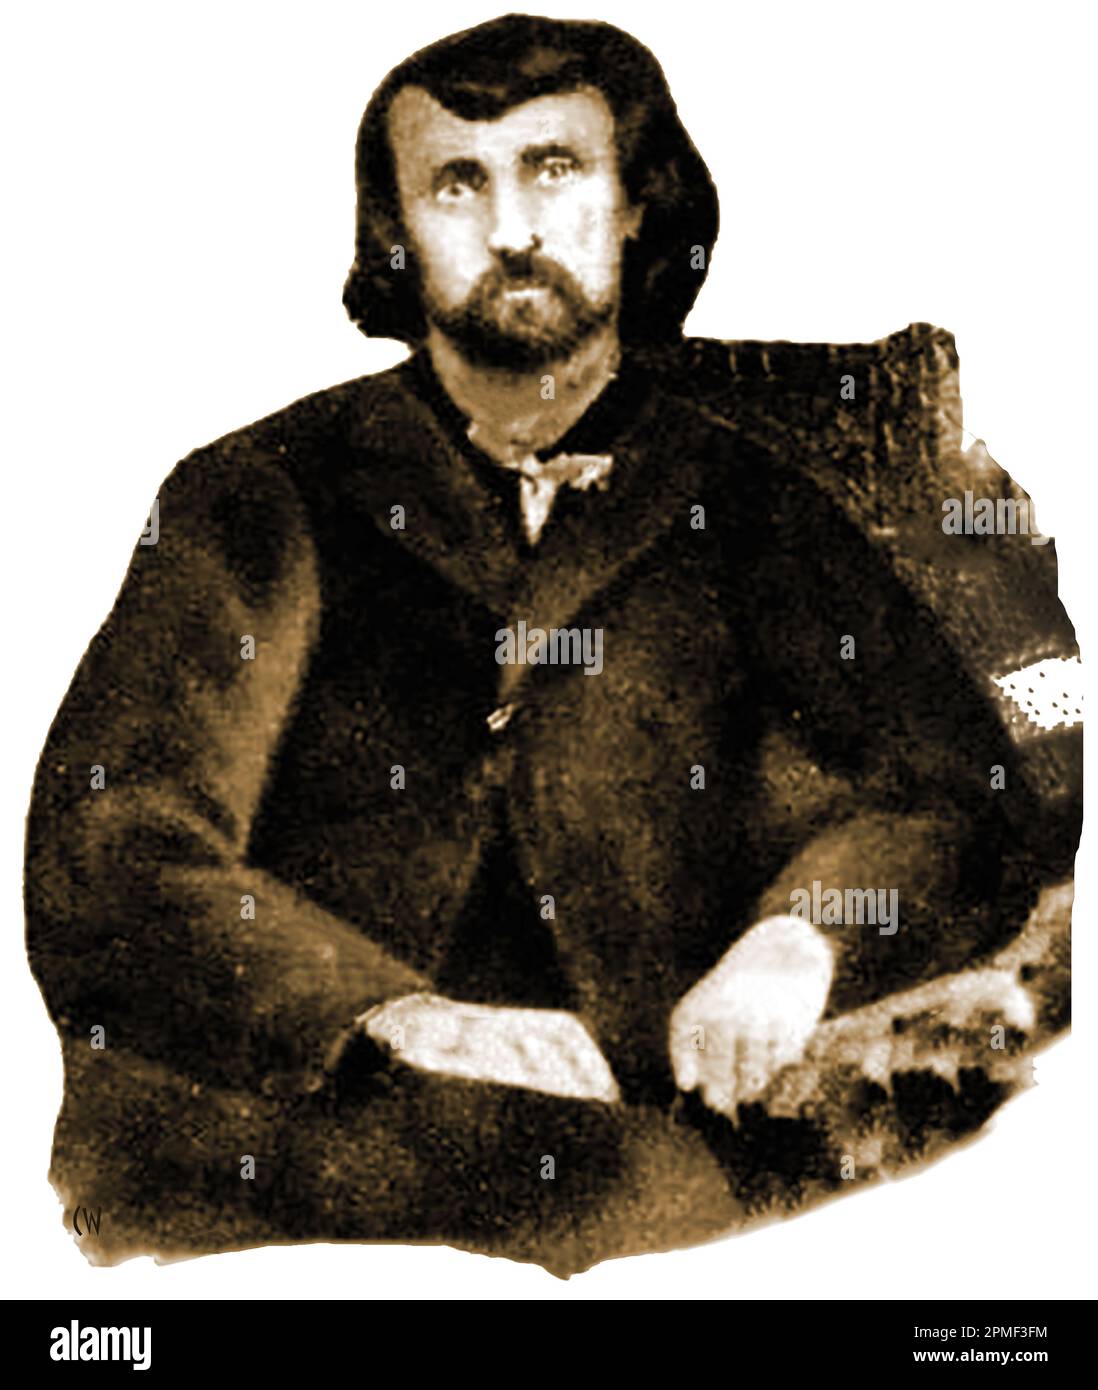 A rare and unusual photograph of Colorado, USA. murderer and cannibal, Alferd Parker, commonly referred to as Alfred Parker. became known as the Colorado Cannibal, was a gold prospector and mountain guide in the Rocky Mountains. He allegedly avoided starvation by killing his companions when confronted with bad weather on one of his expeditions and was charged with manslaughter after claiming he ate their dead bodies in desperation for food.. Released ion bail, he became a postal worker. Stock Photo